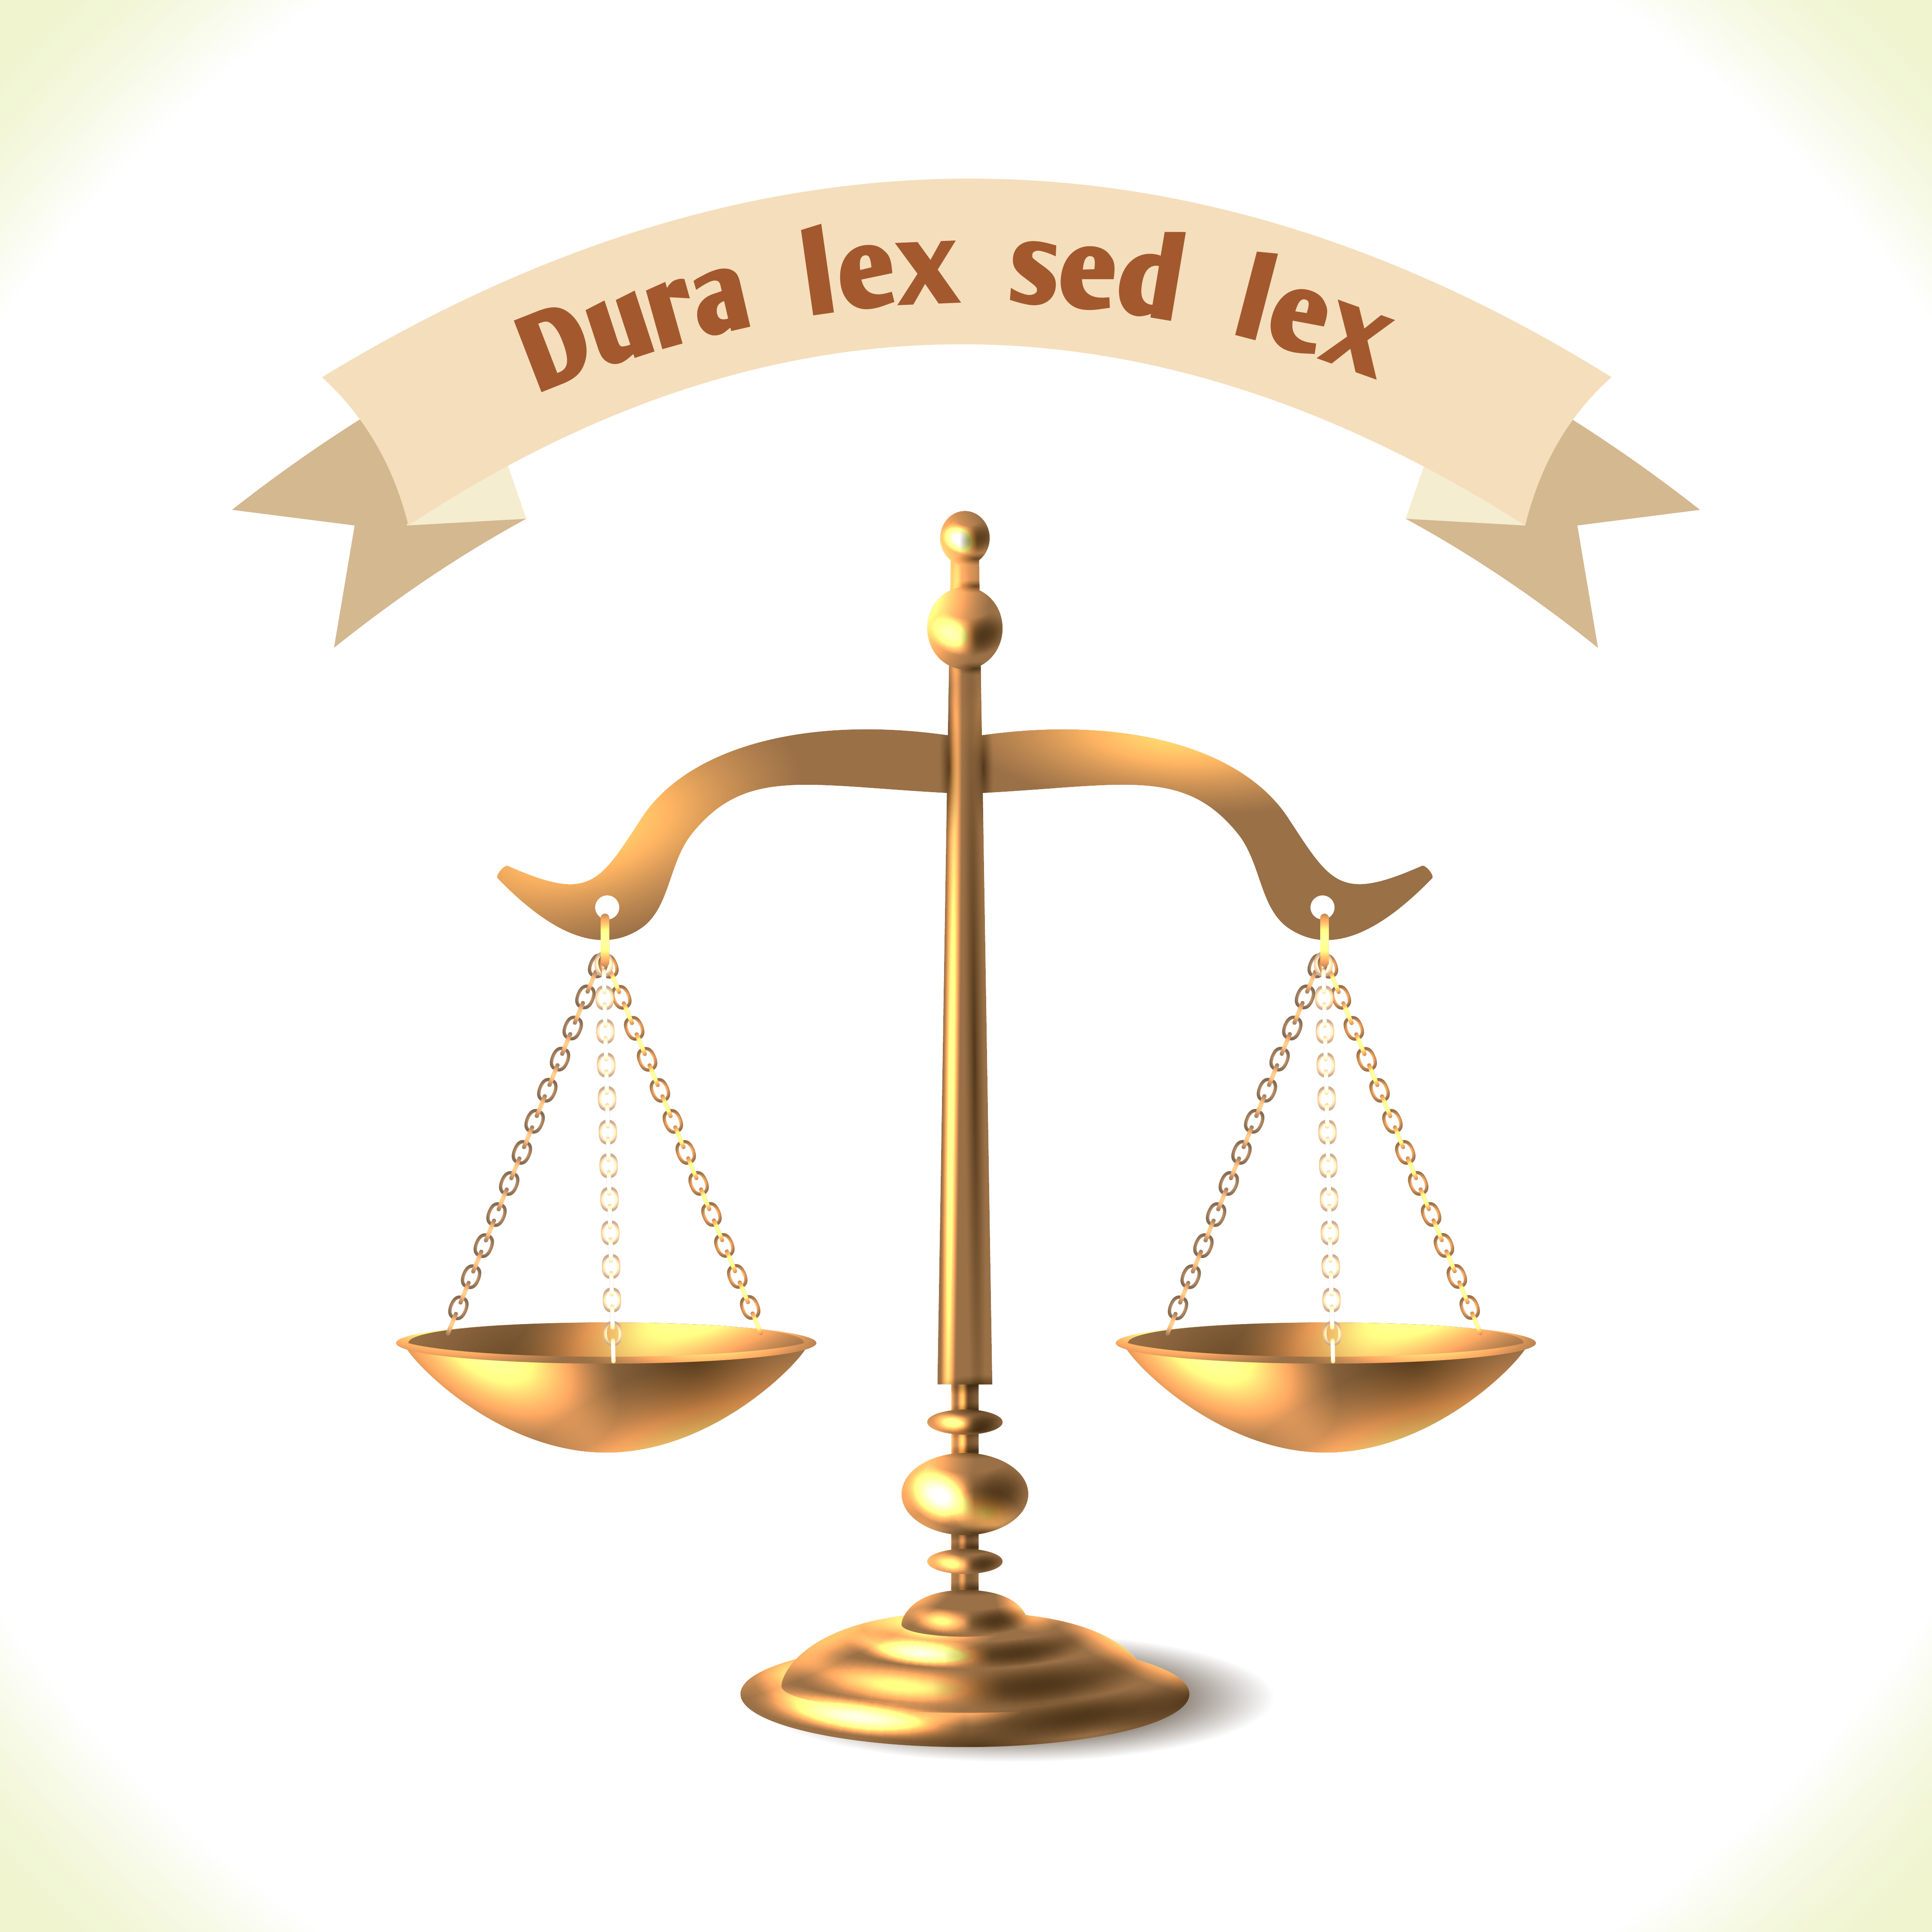 Download Law icon court scale - Download Free Vectors, Clipart ...